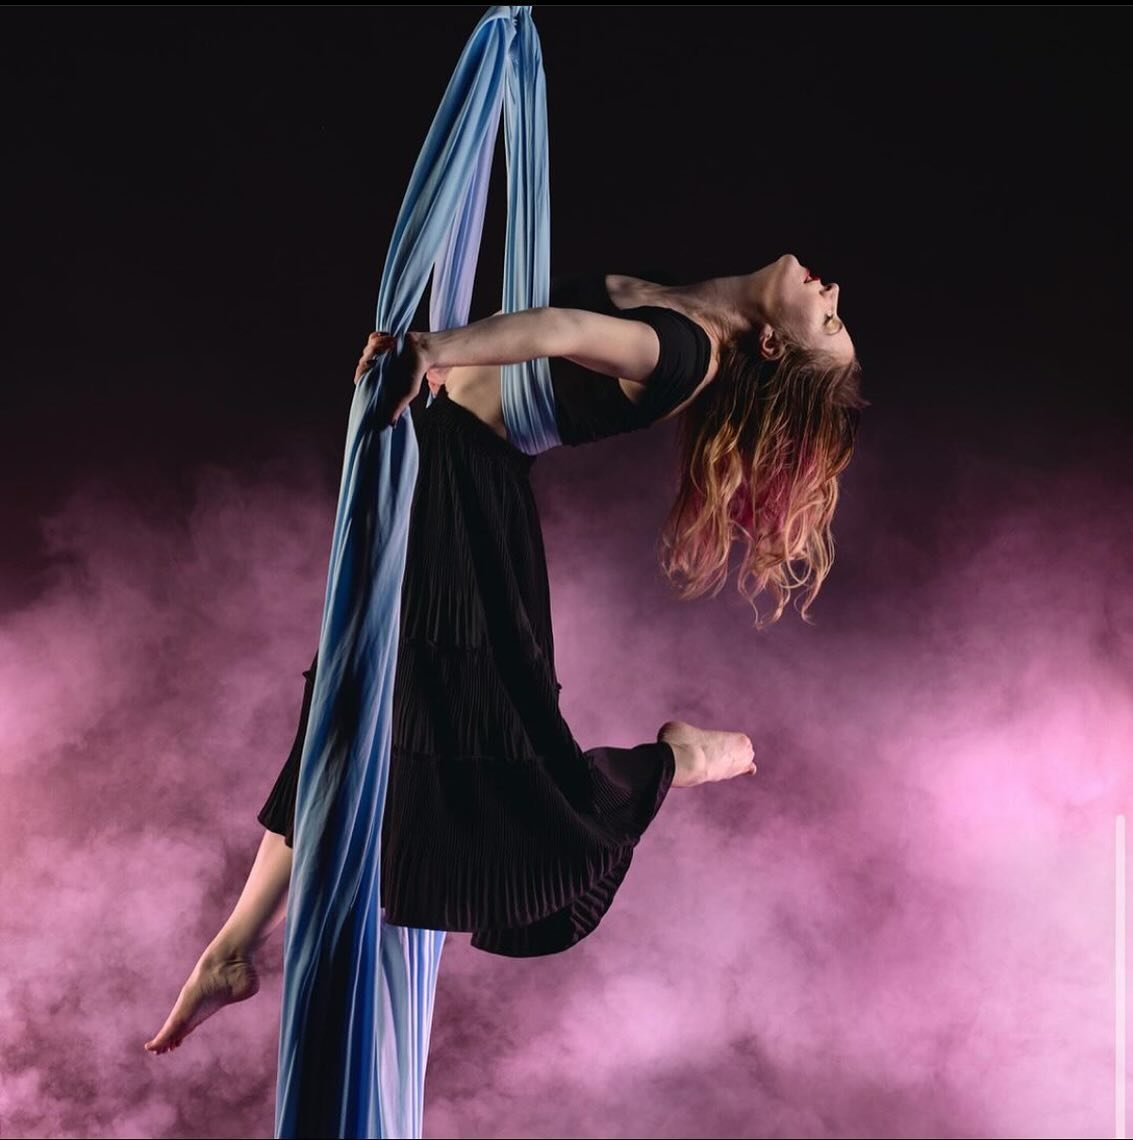 This could be you!! No prior experience needed! 
✨Join Alicia McDaniels, Certified Aerial Silks Artist, @acrophobicaerialist for an amazing intro to aerial silks. Strengthen your core and learn the art of being an aerialist all in one with this begin